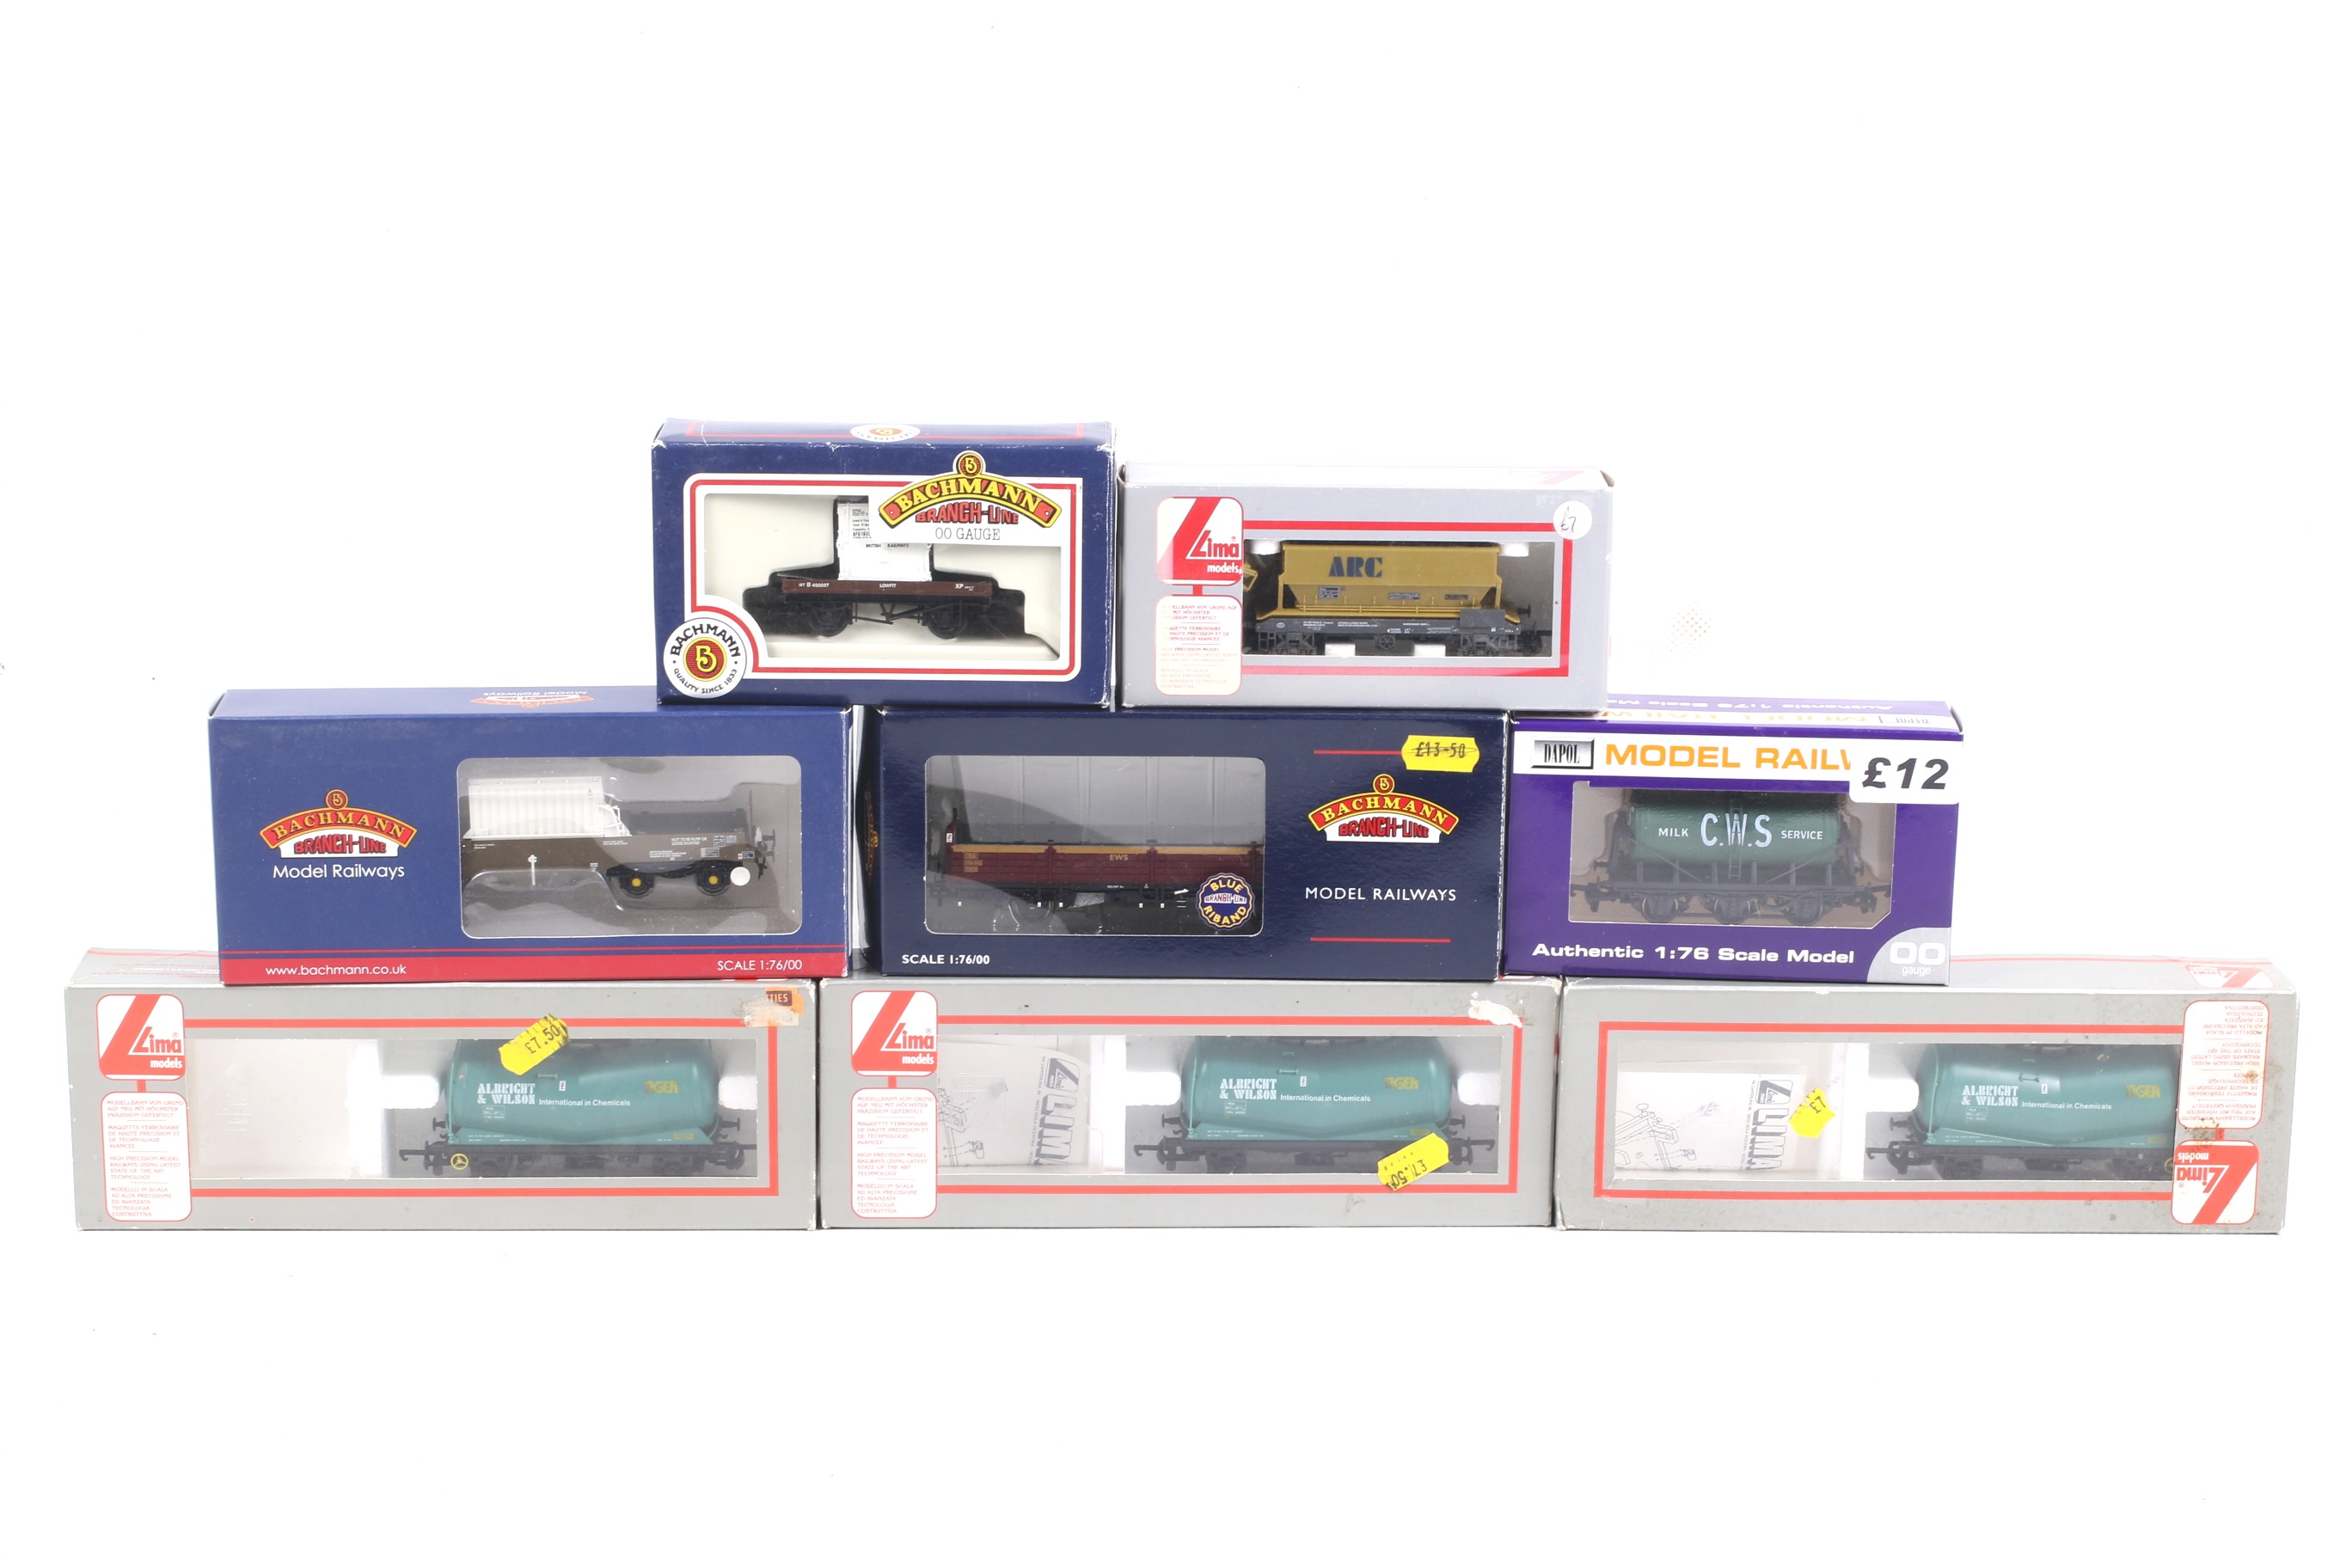 Eight OO gauge goods wagons. Including tankers, bulkers, flatbeds etc from Bachmann, Lima and Dapol.